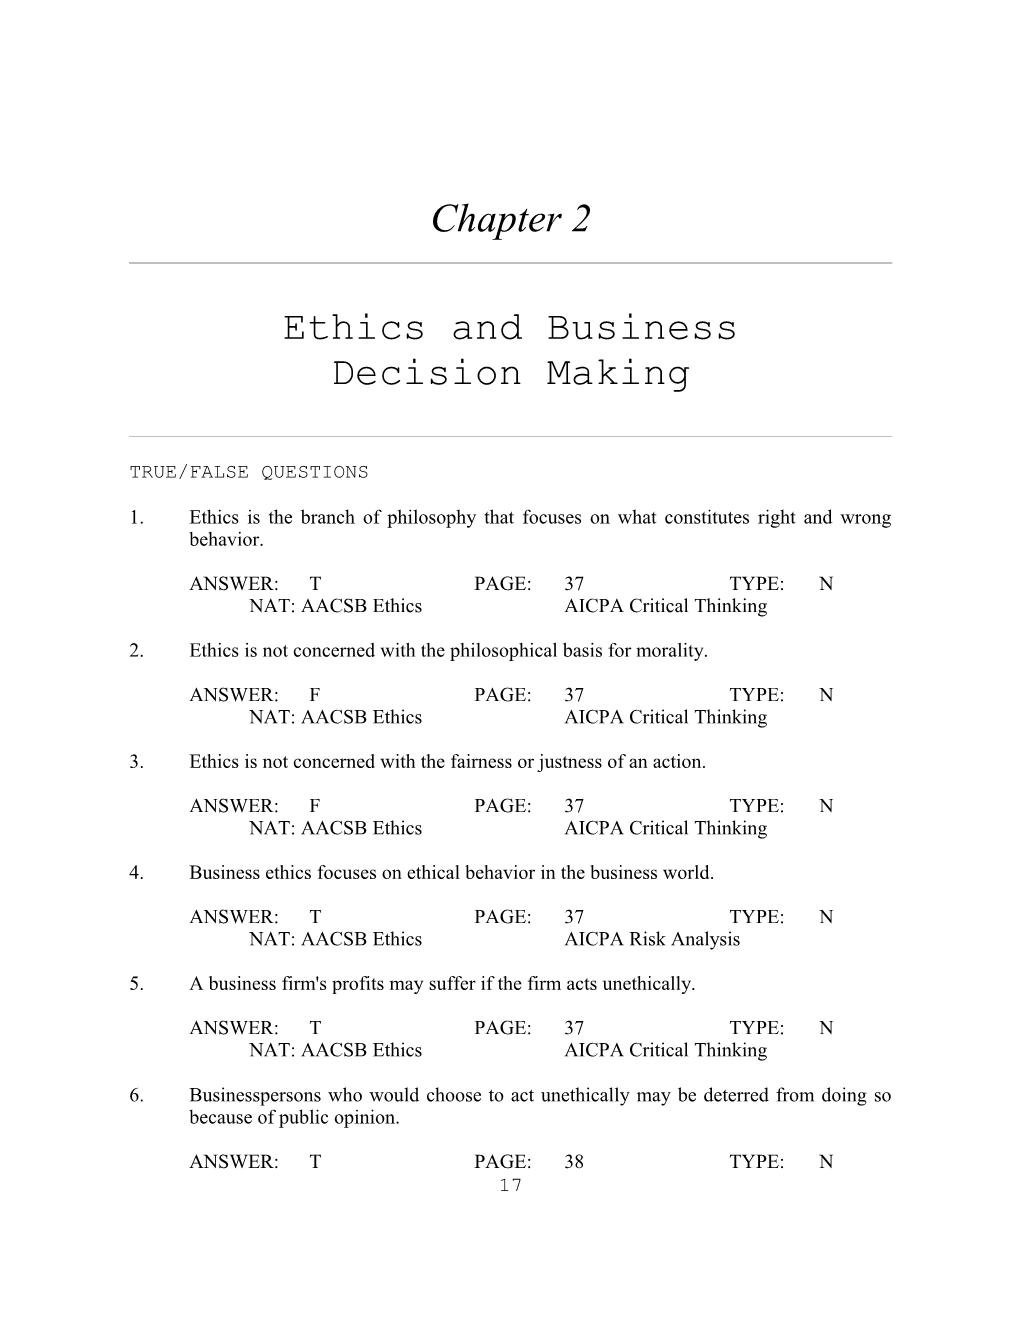 Chapter 2: Ethics and Business Decision Making 1